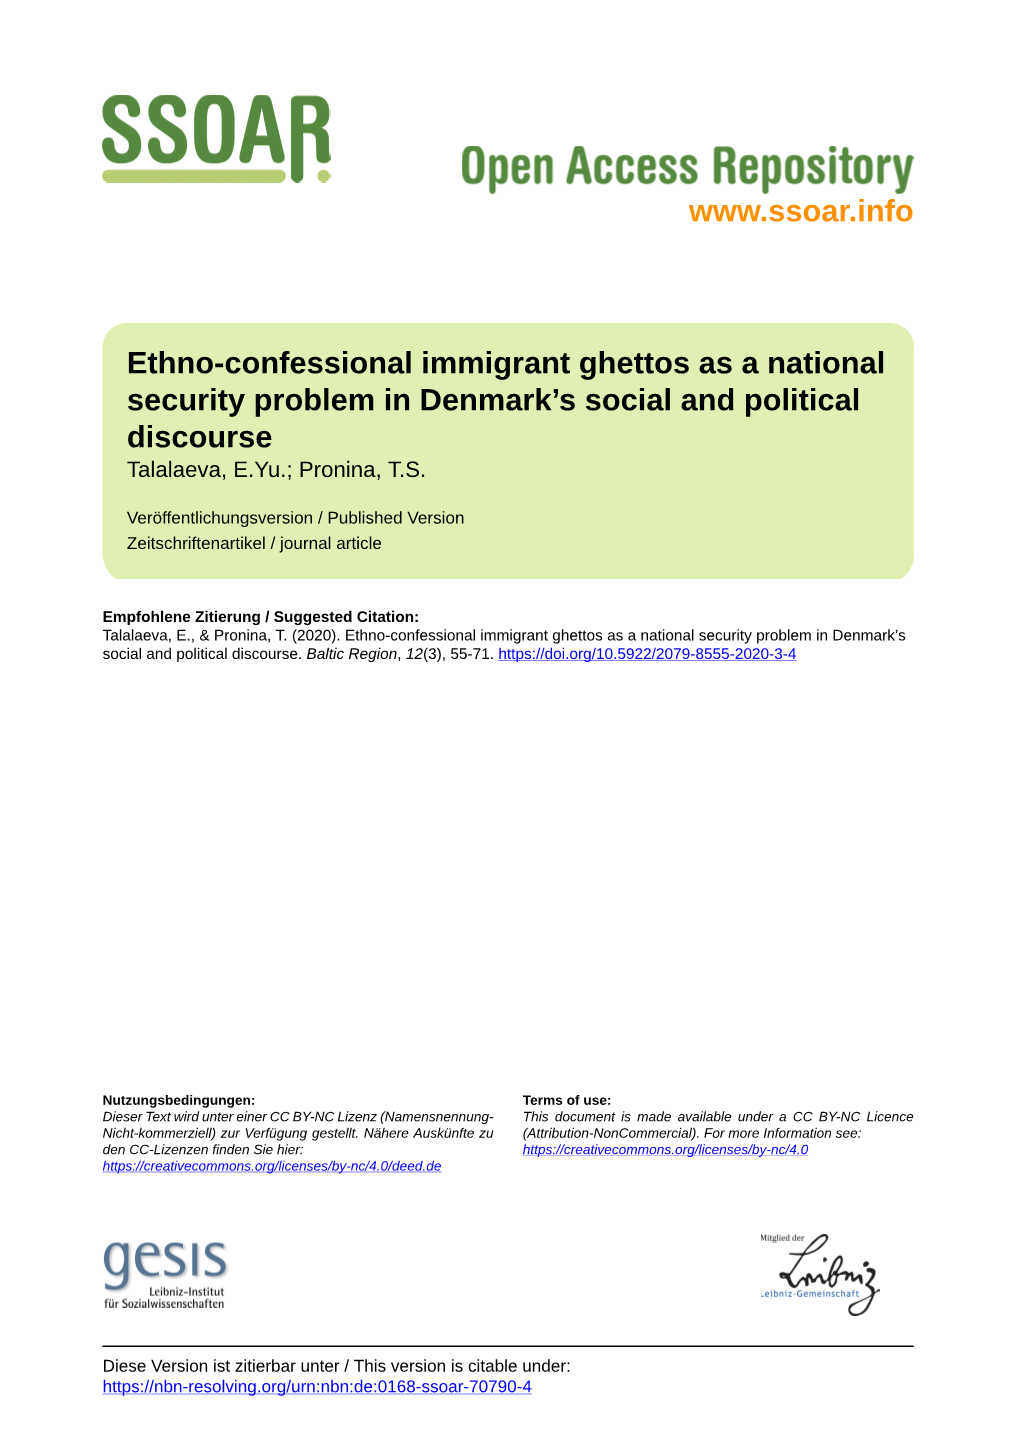 Ethno-Confessional Immigrant Ghettos As a National Security Problem in Denmark’S Social and Political Discourse Talalaeva, E.Yu.; Pronina, T.S